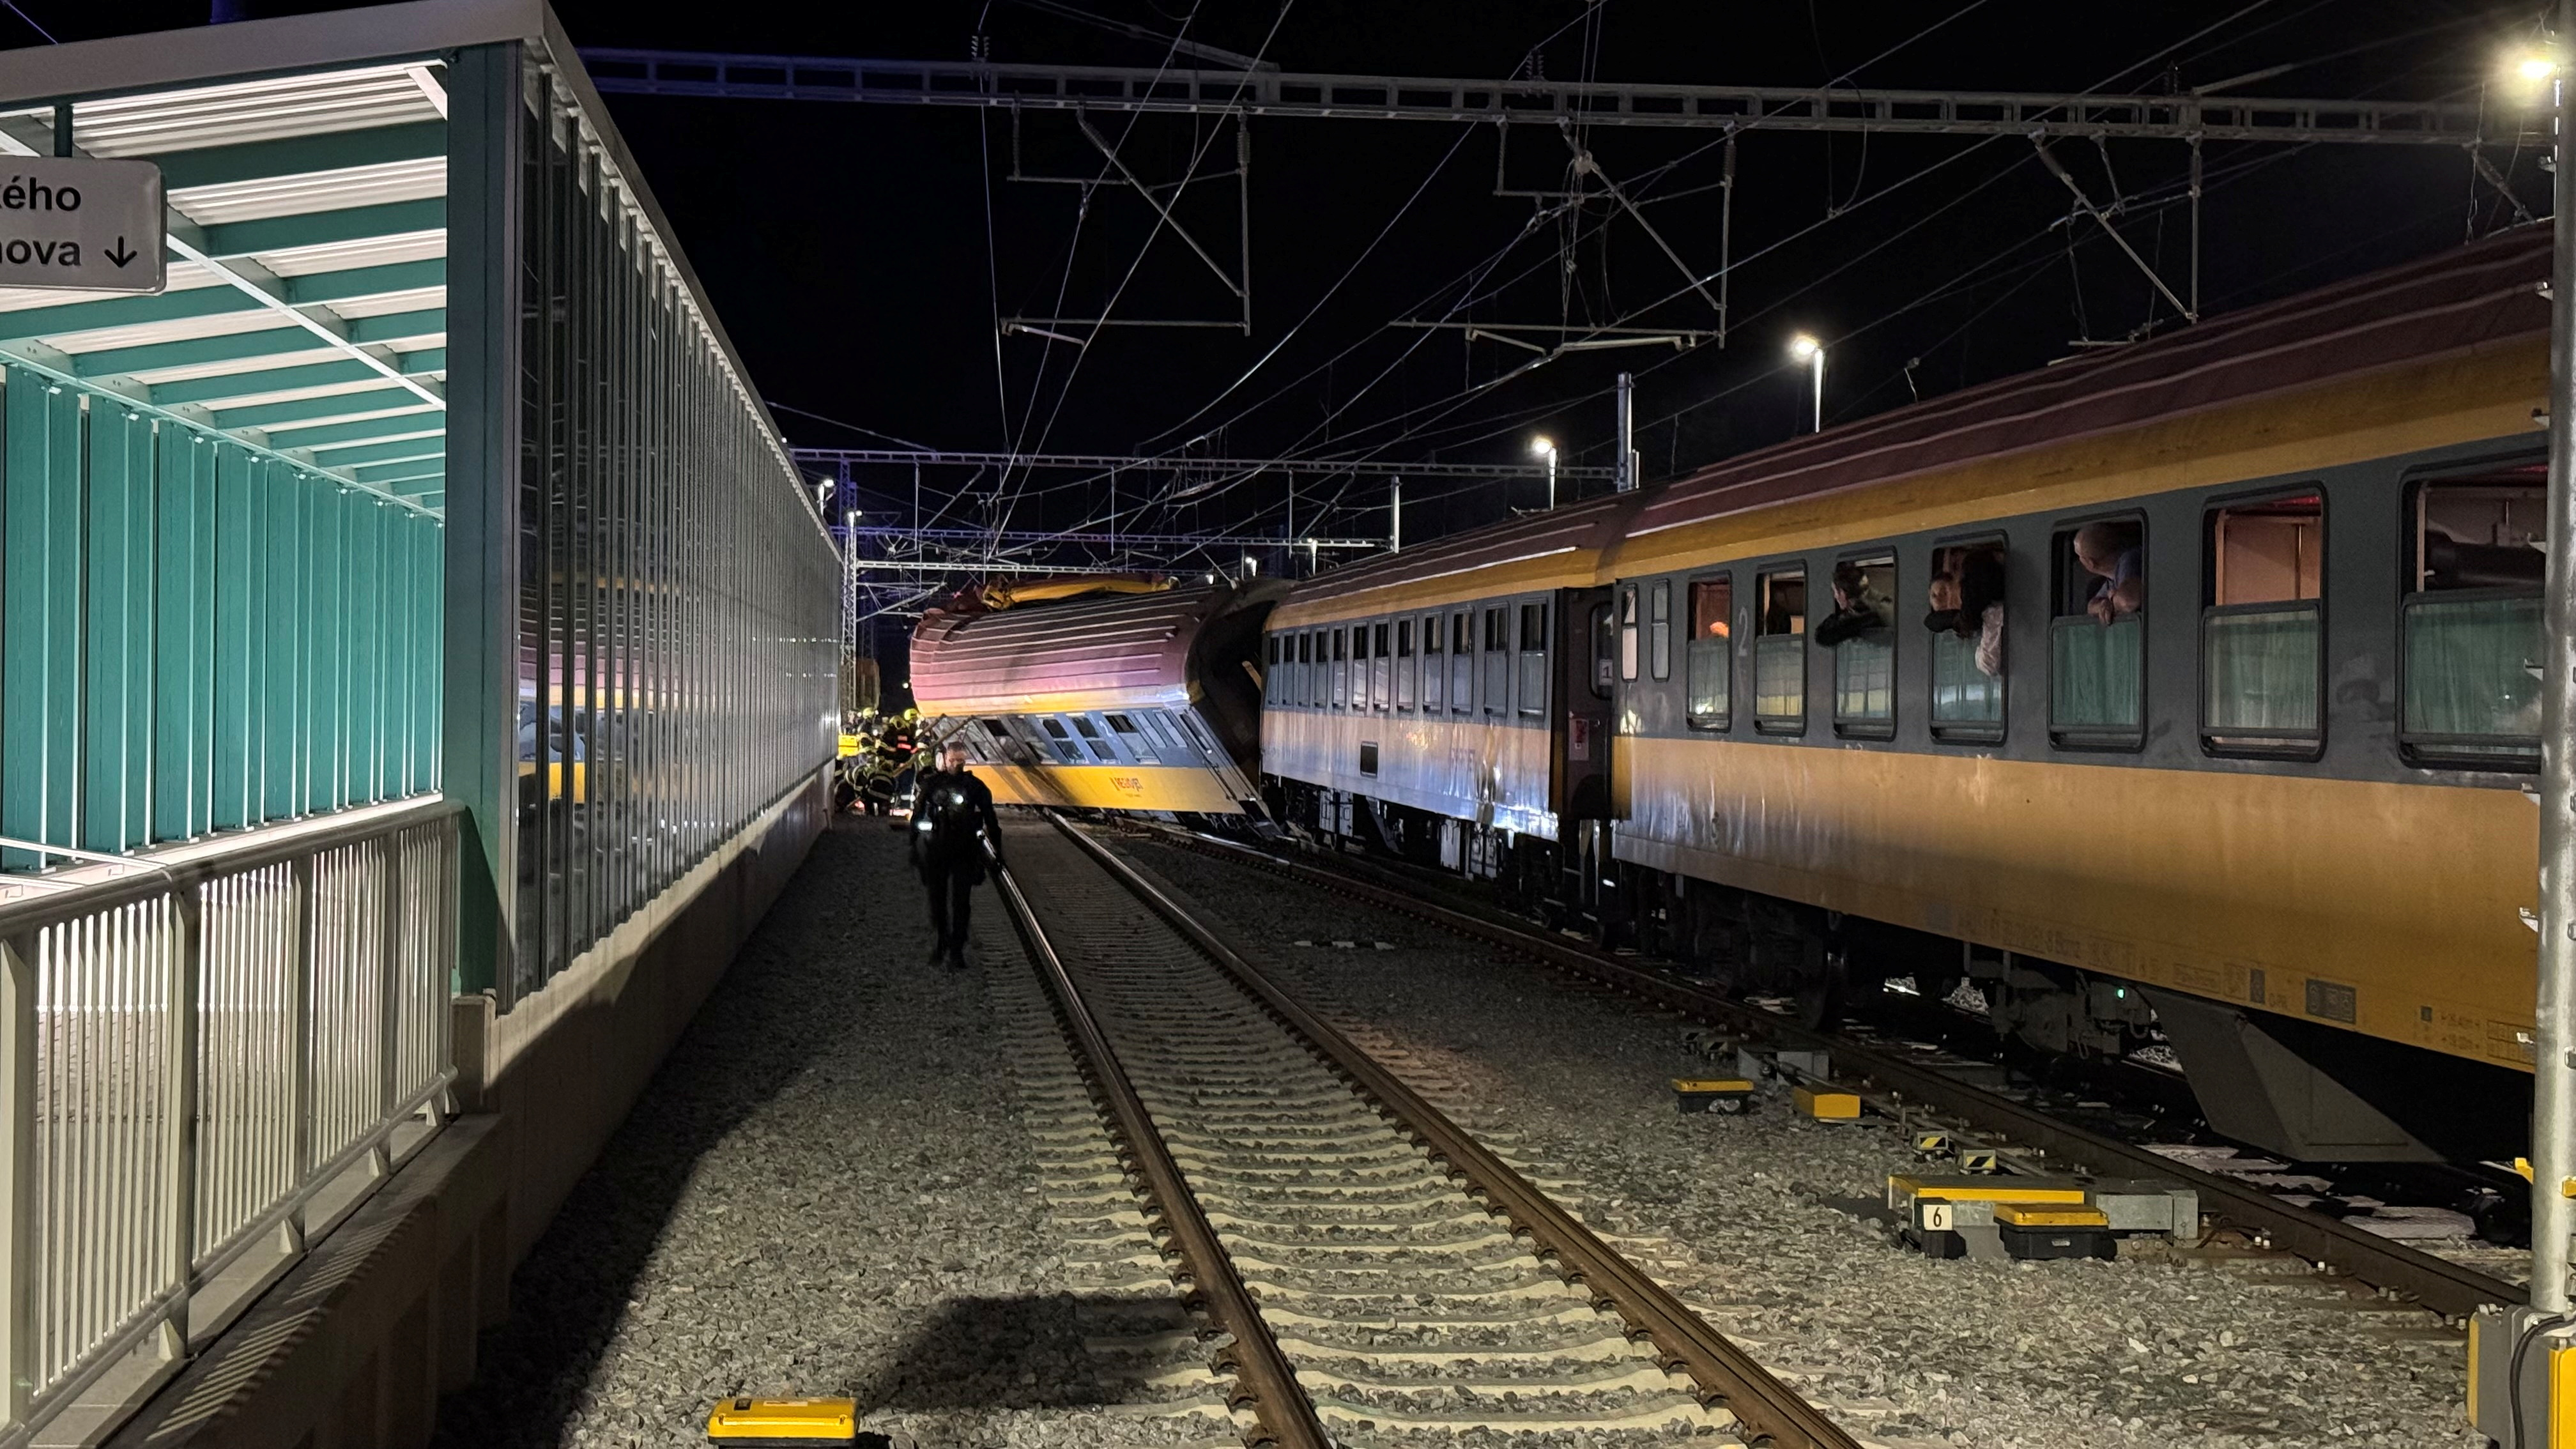 A view of a derailed train carriage following a collision between a passenger train and a freight train in Pardubice